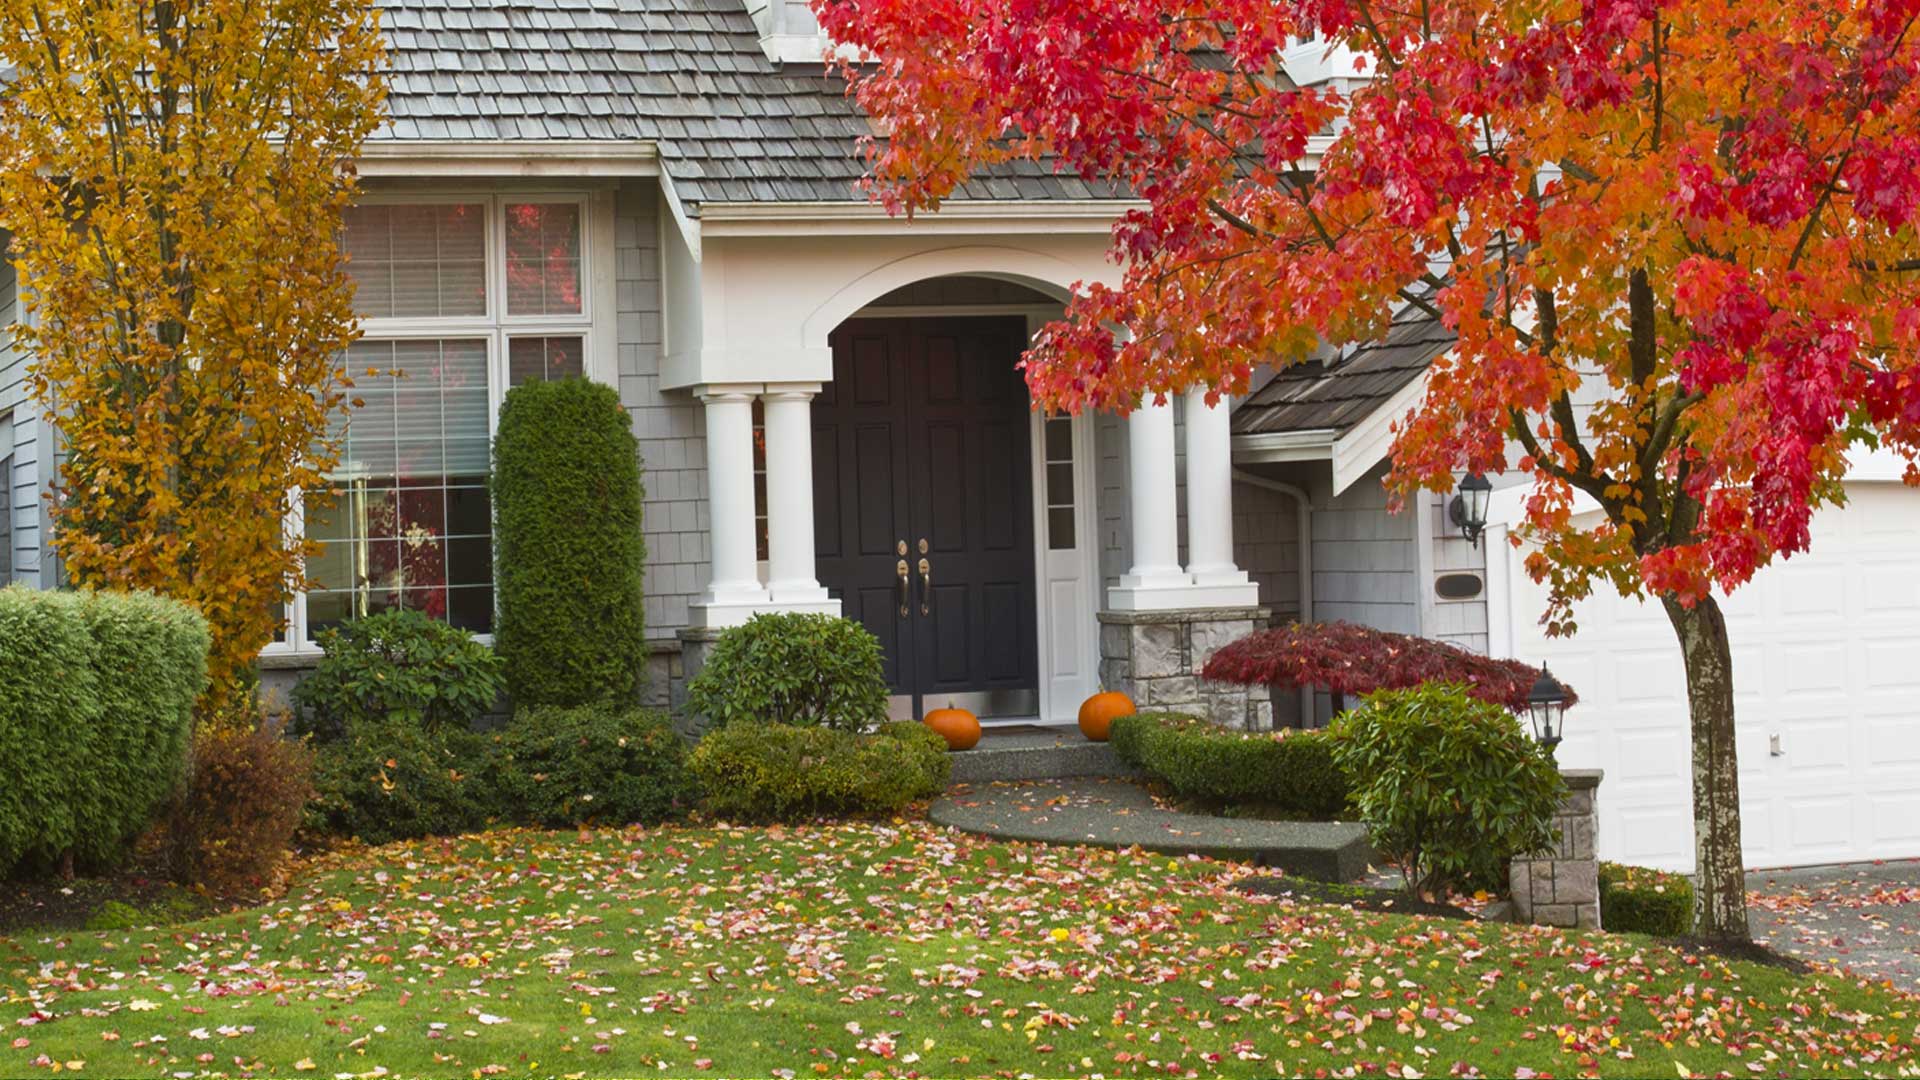 Residential property in Happy Valley, OR during the fall time in need of fall cleanup services.